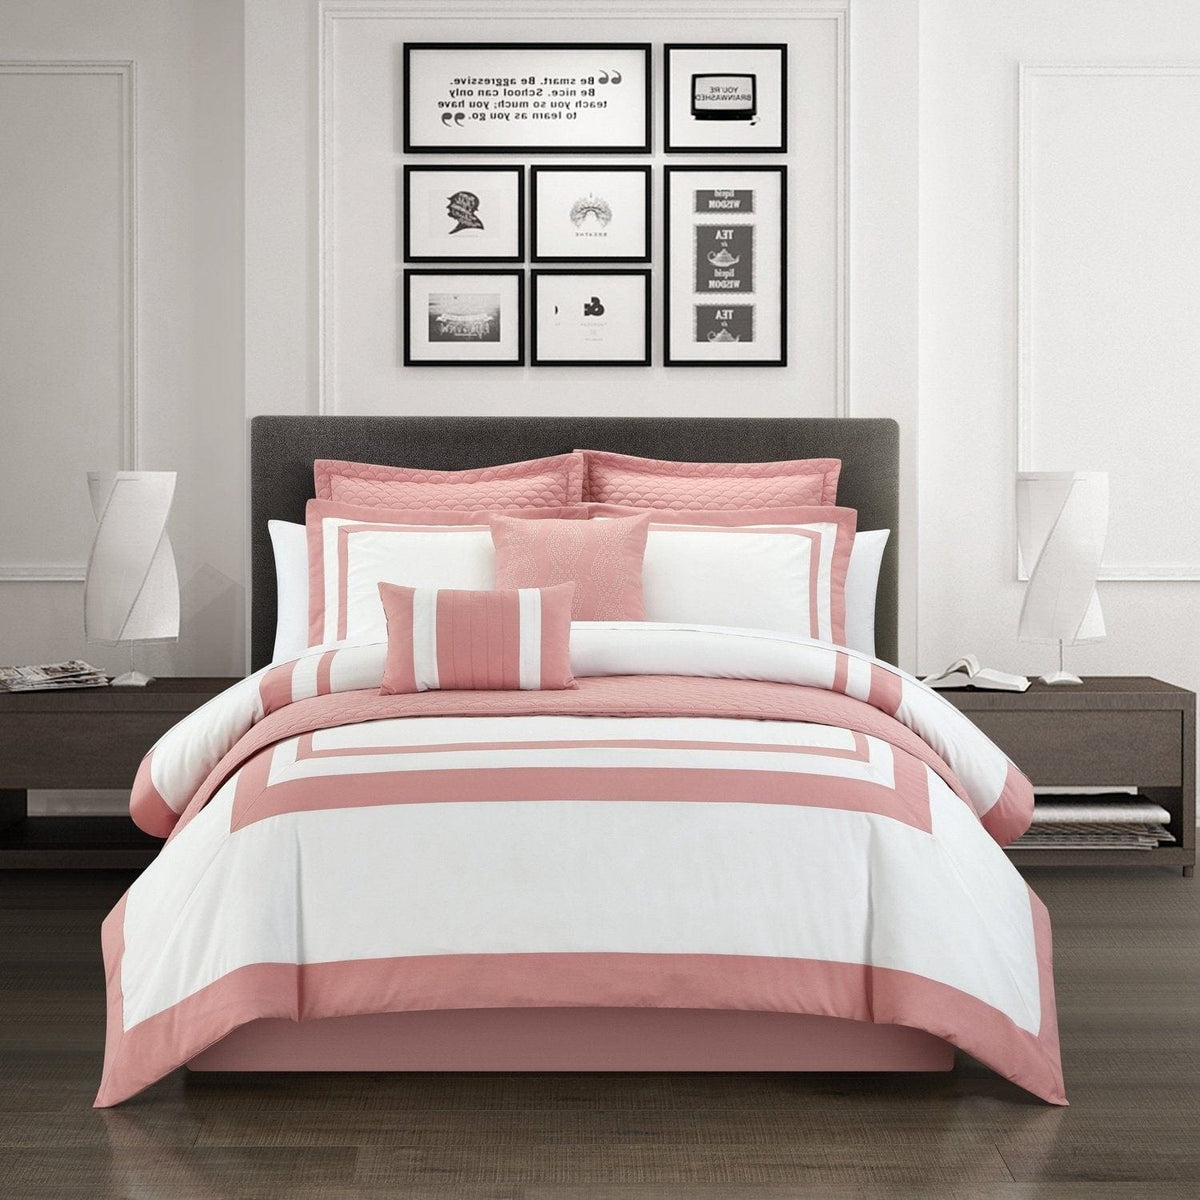 Chic Home Hortense 8 Piece Comforter And Quilt Set Rose